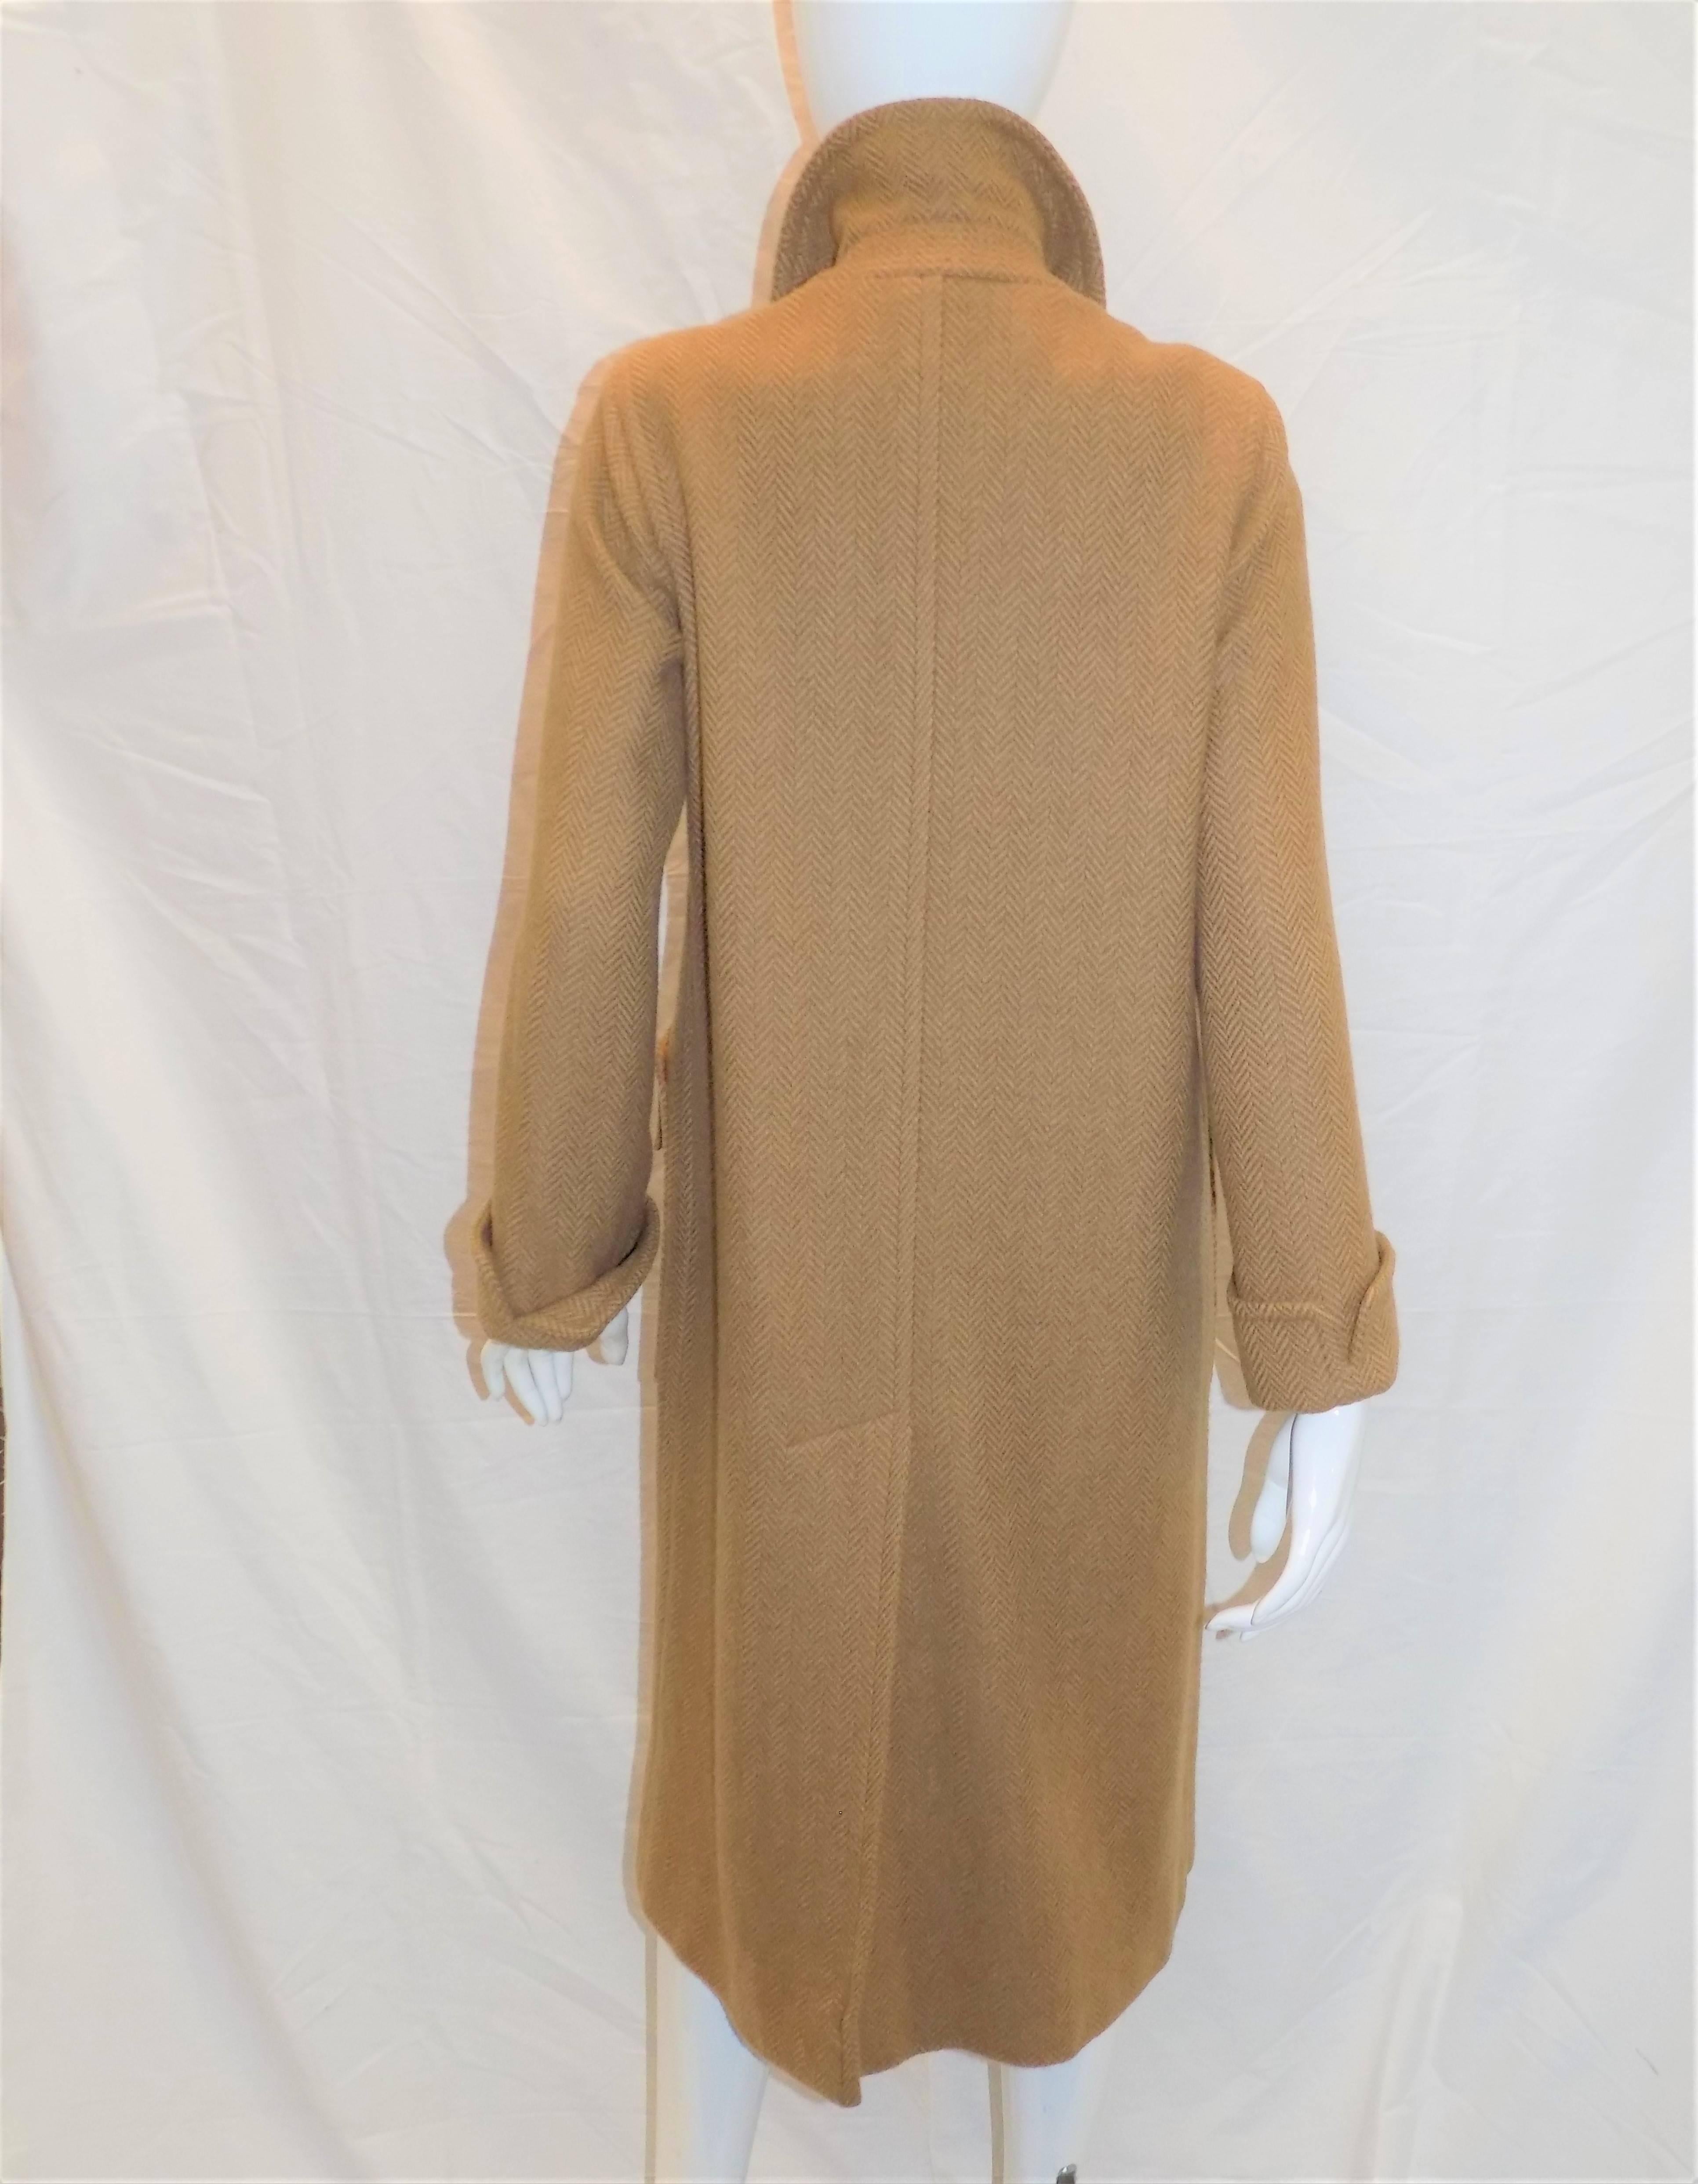 YSL Yves Saint Laurent Rive Gauche Vintage wool  camel haring bone coat In Excellent Condition For Sale In New York, NY